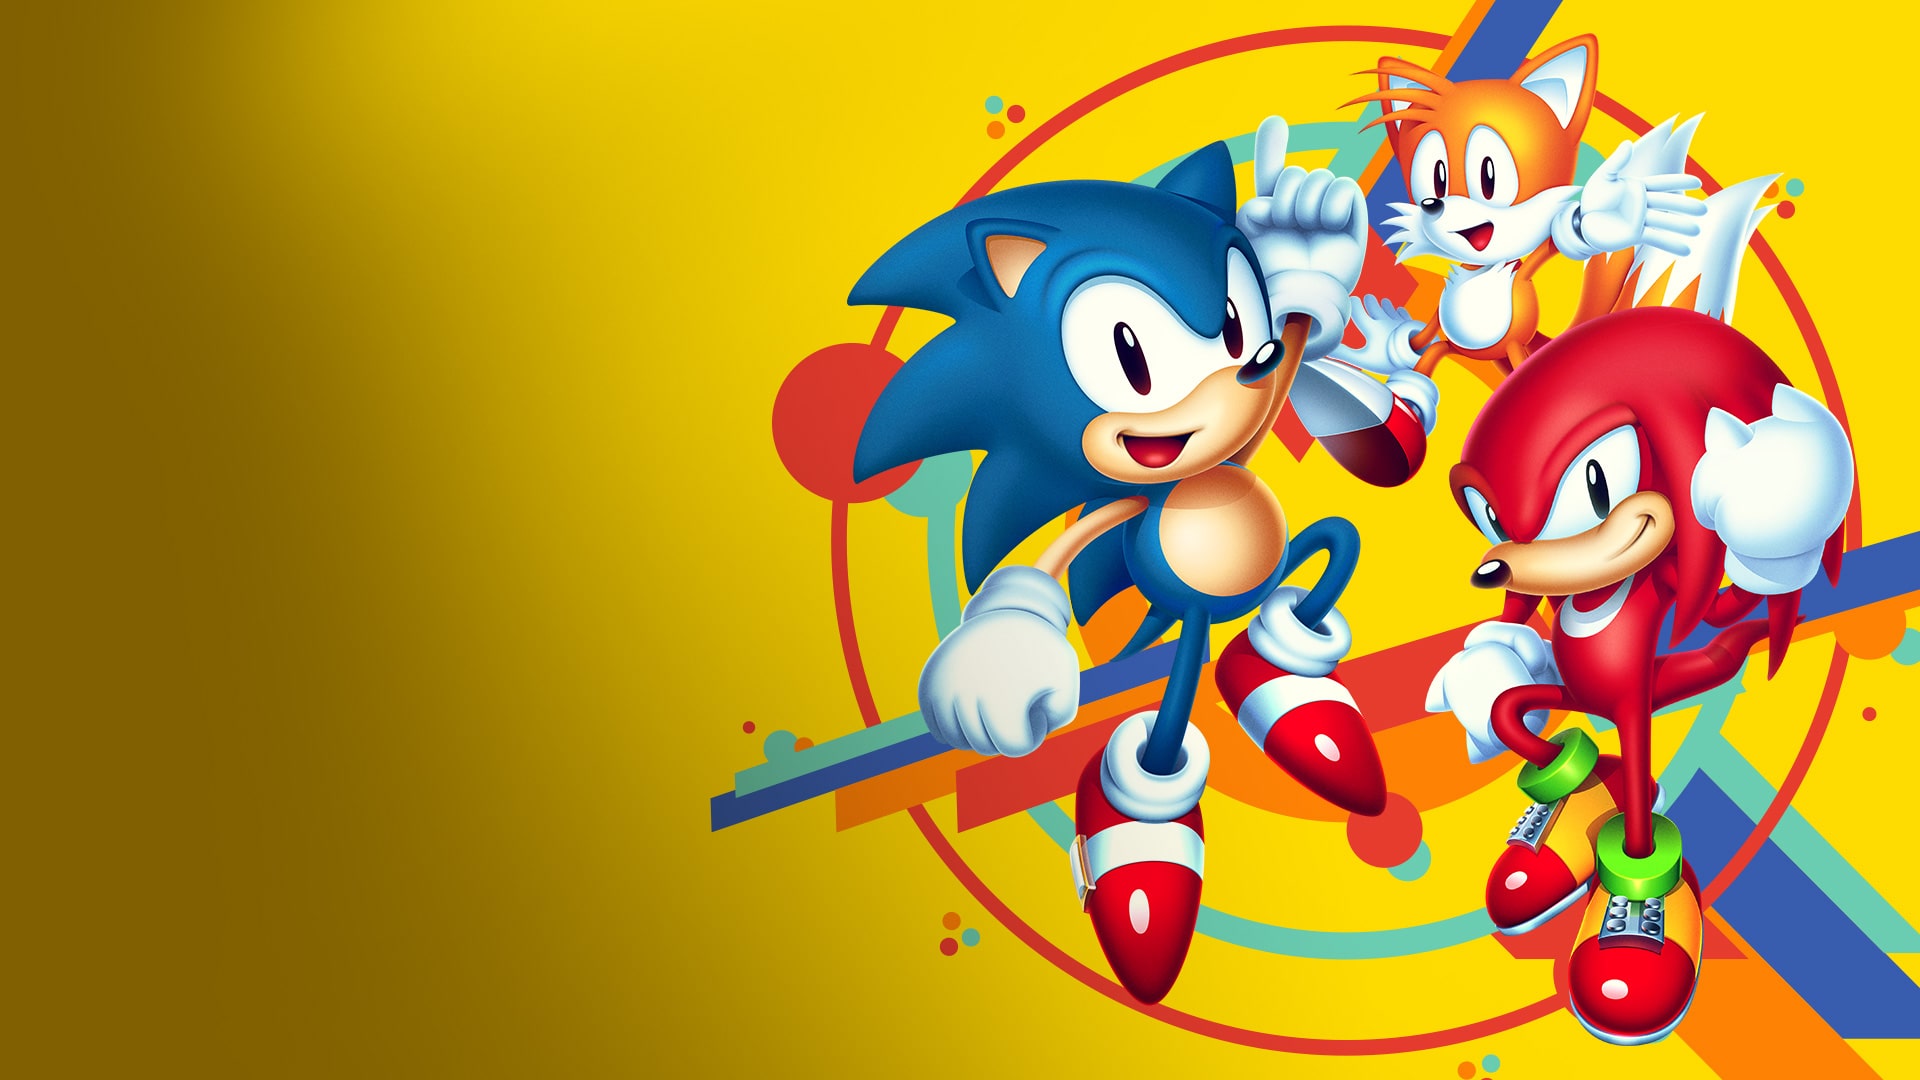 playstation store sonic